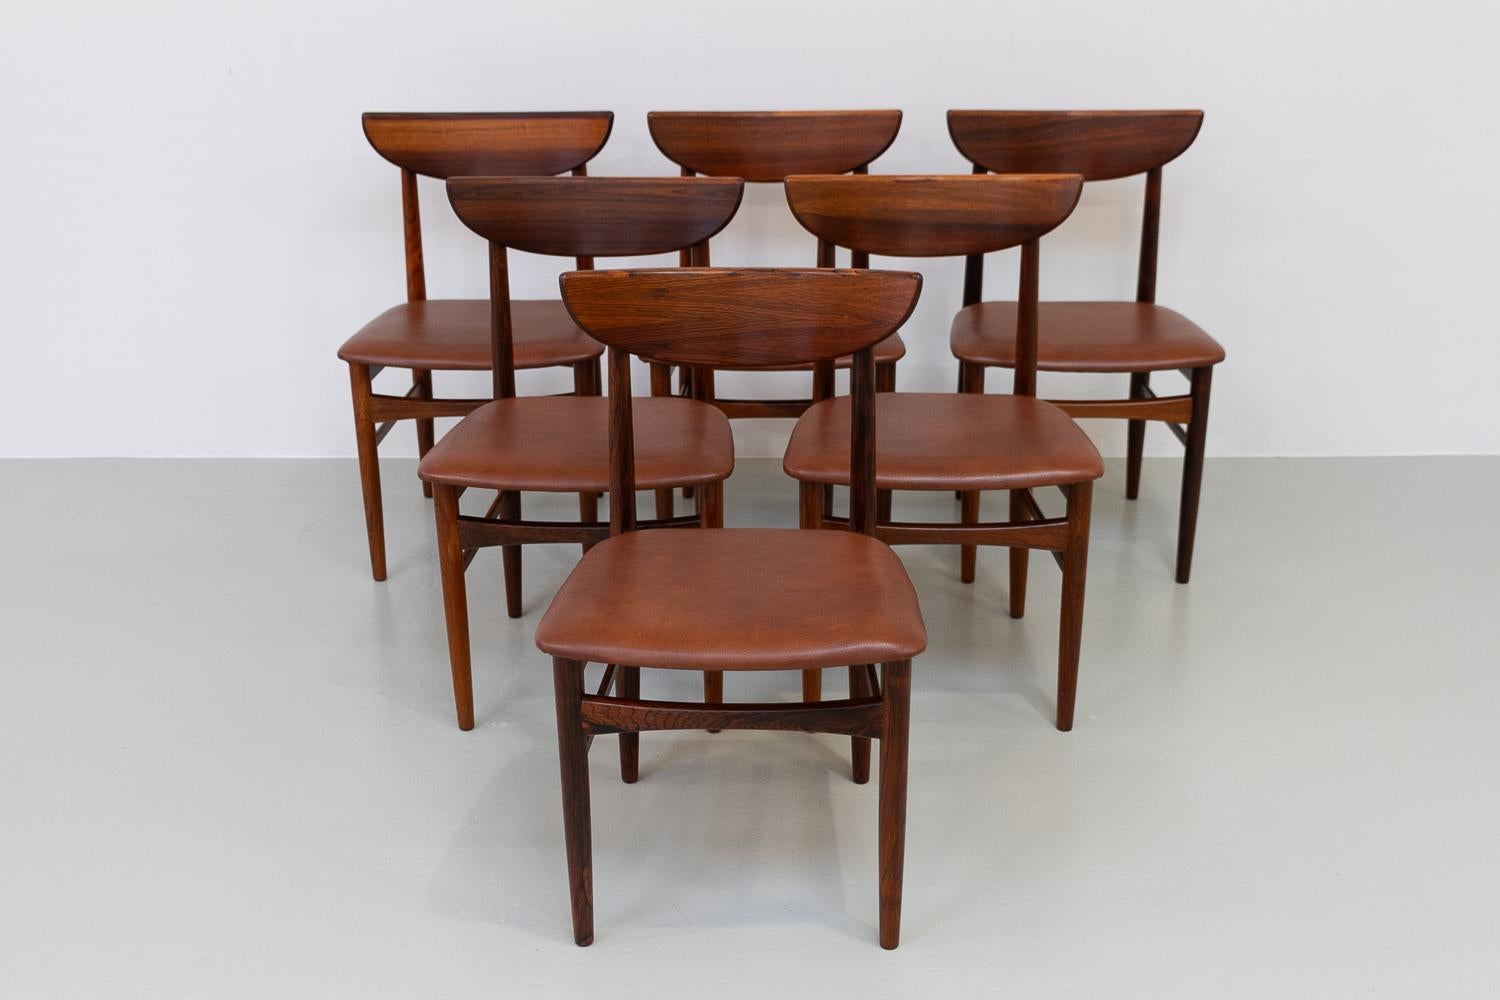 Vintage Danish Rosewood Dining Chairs by E.W. Bach for Skovby, 1960s. Set of 6.
Set of six beautiful Danish Mid-Century Modern dining room chairs in rosewood/palisander. Designed by E.W. Bach and manufactured by Skov Møbelfabrik in Denmark in the